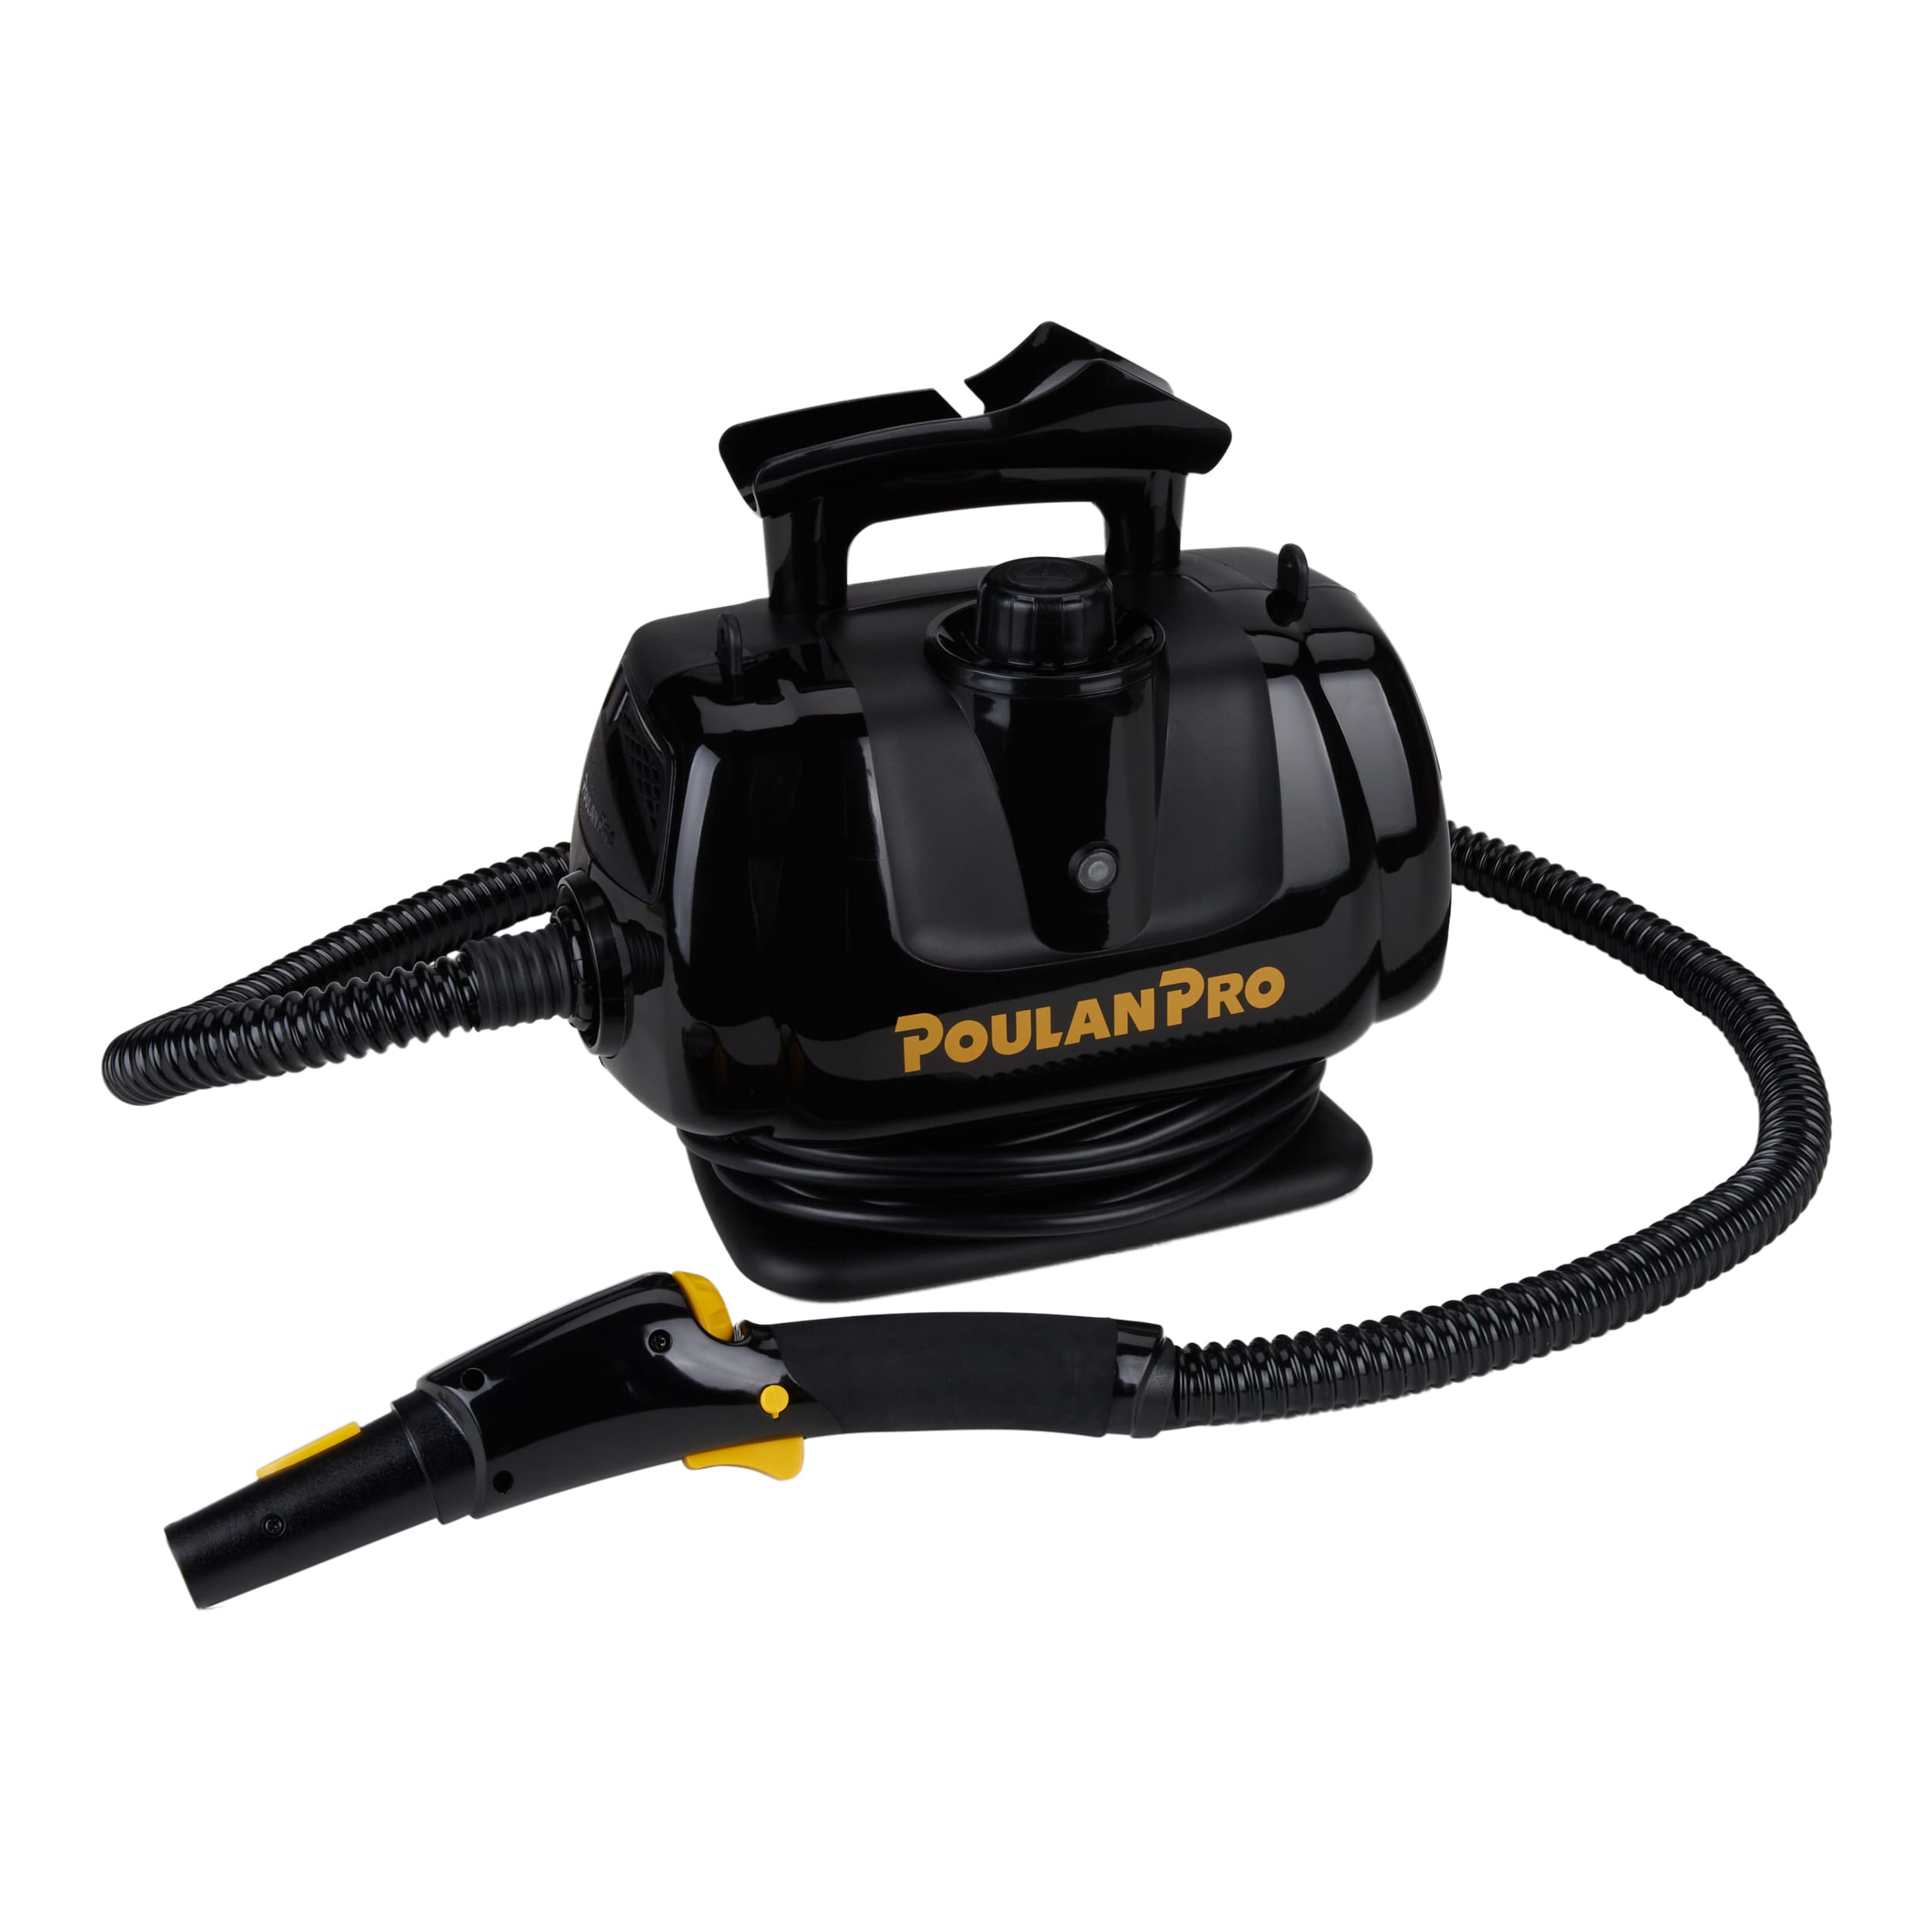 Poulan Pro PP270 Portable Steam Cleaner